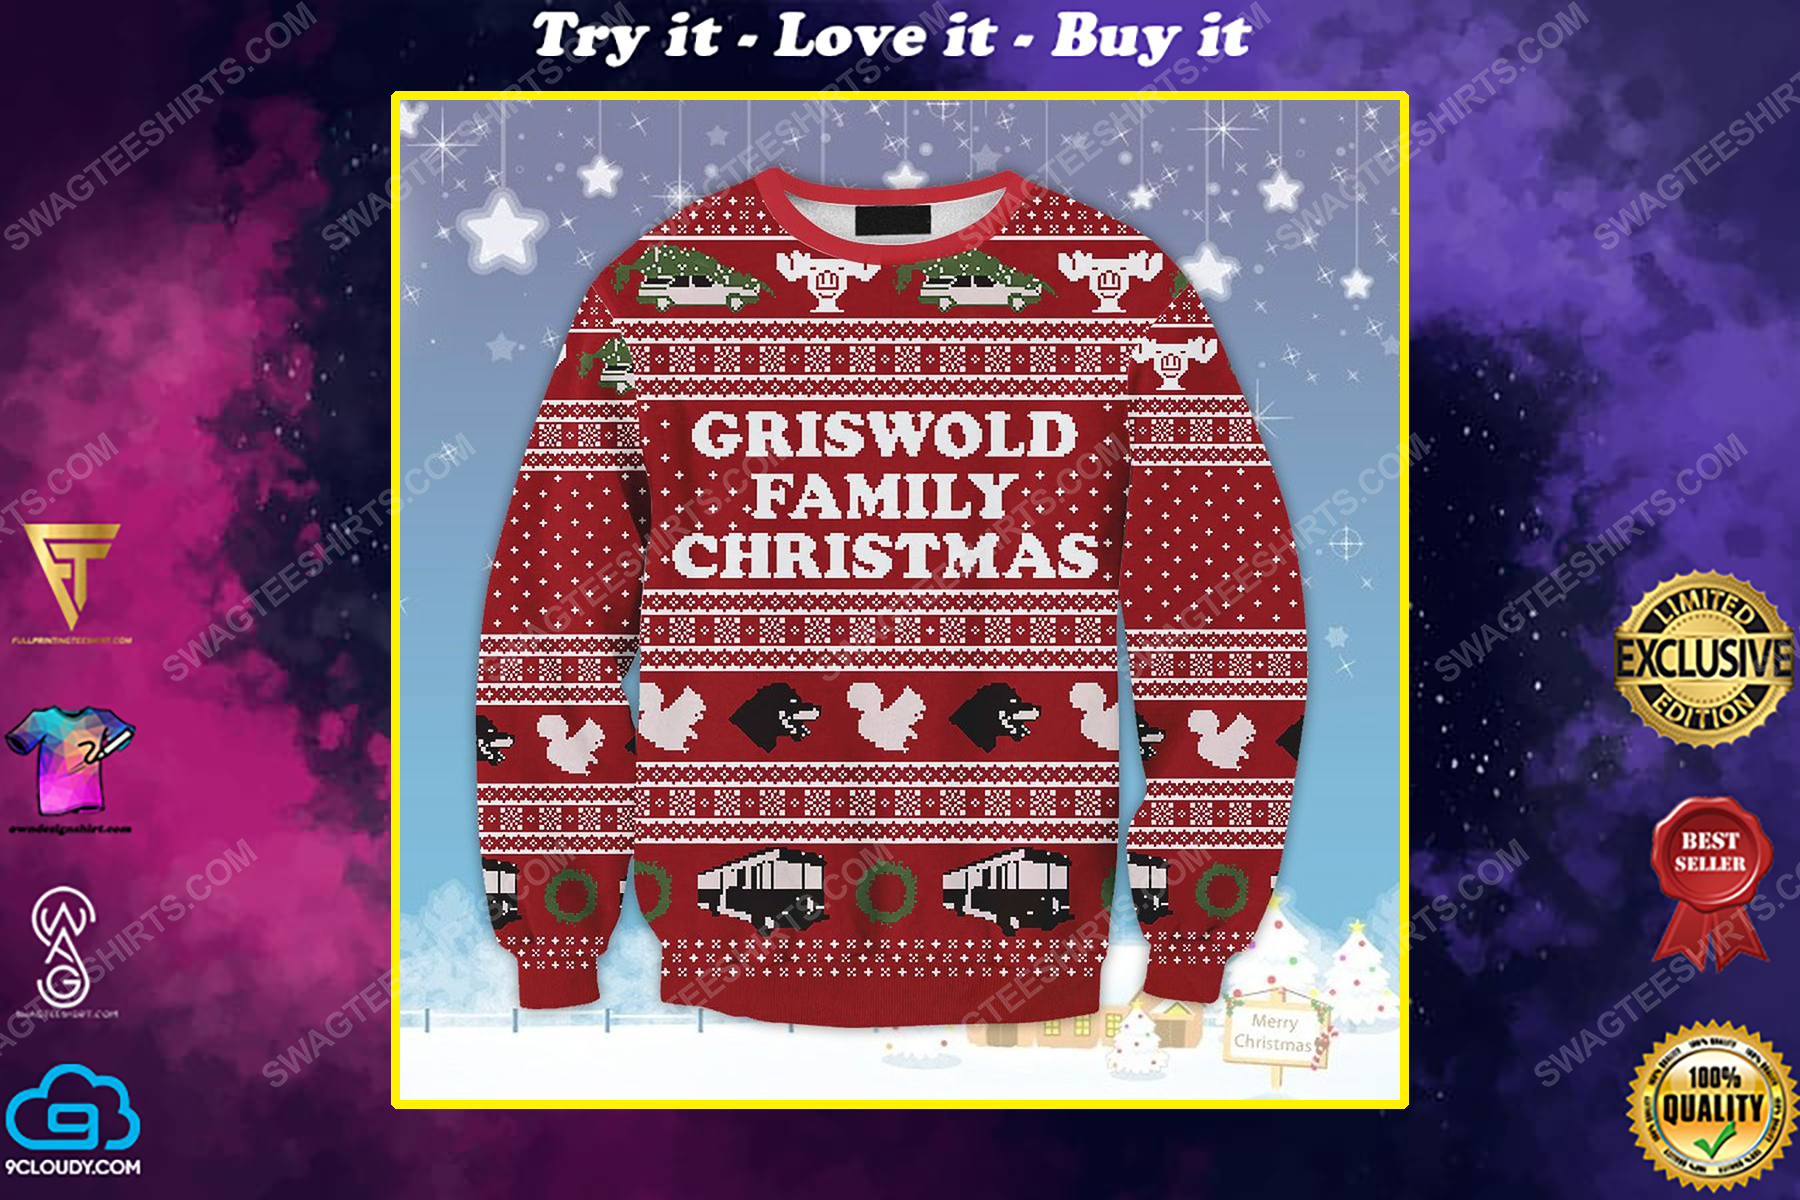 National lampoon's vacation griswold family ugly christmas sweater 1